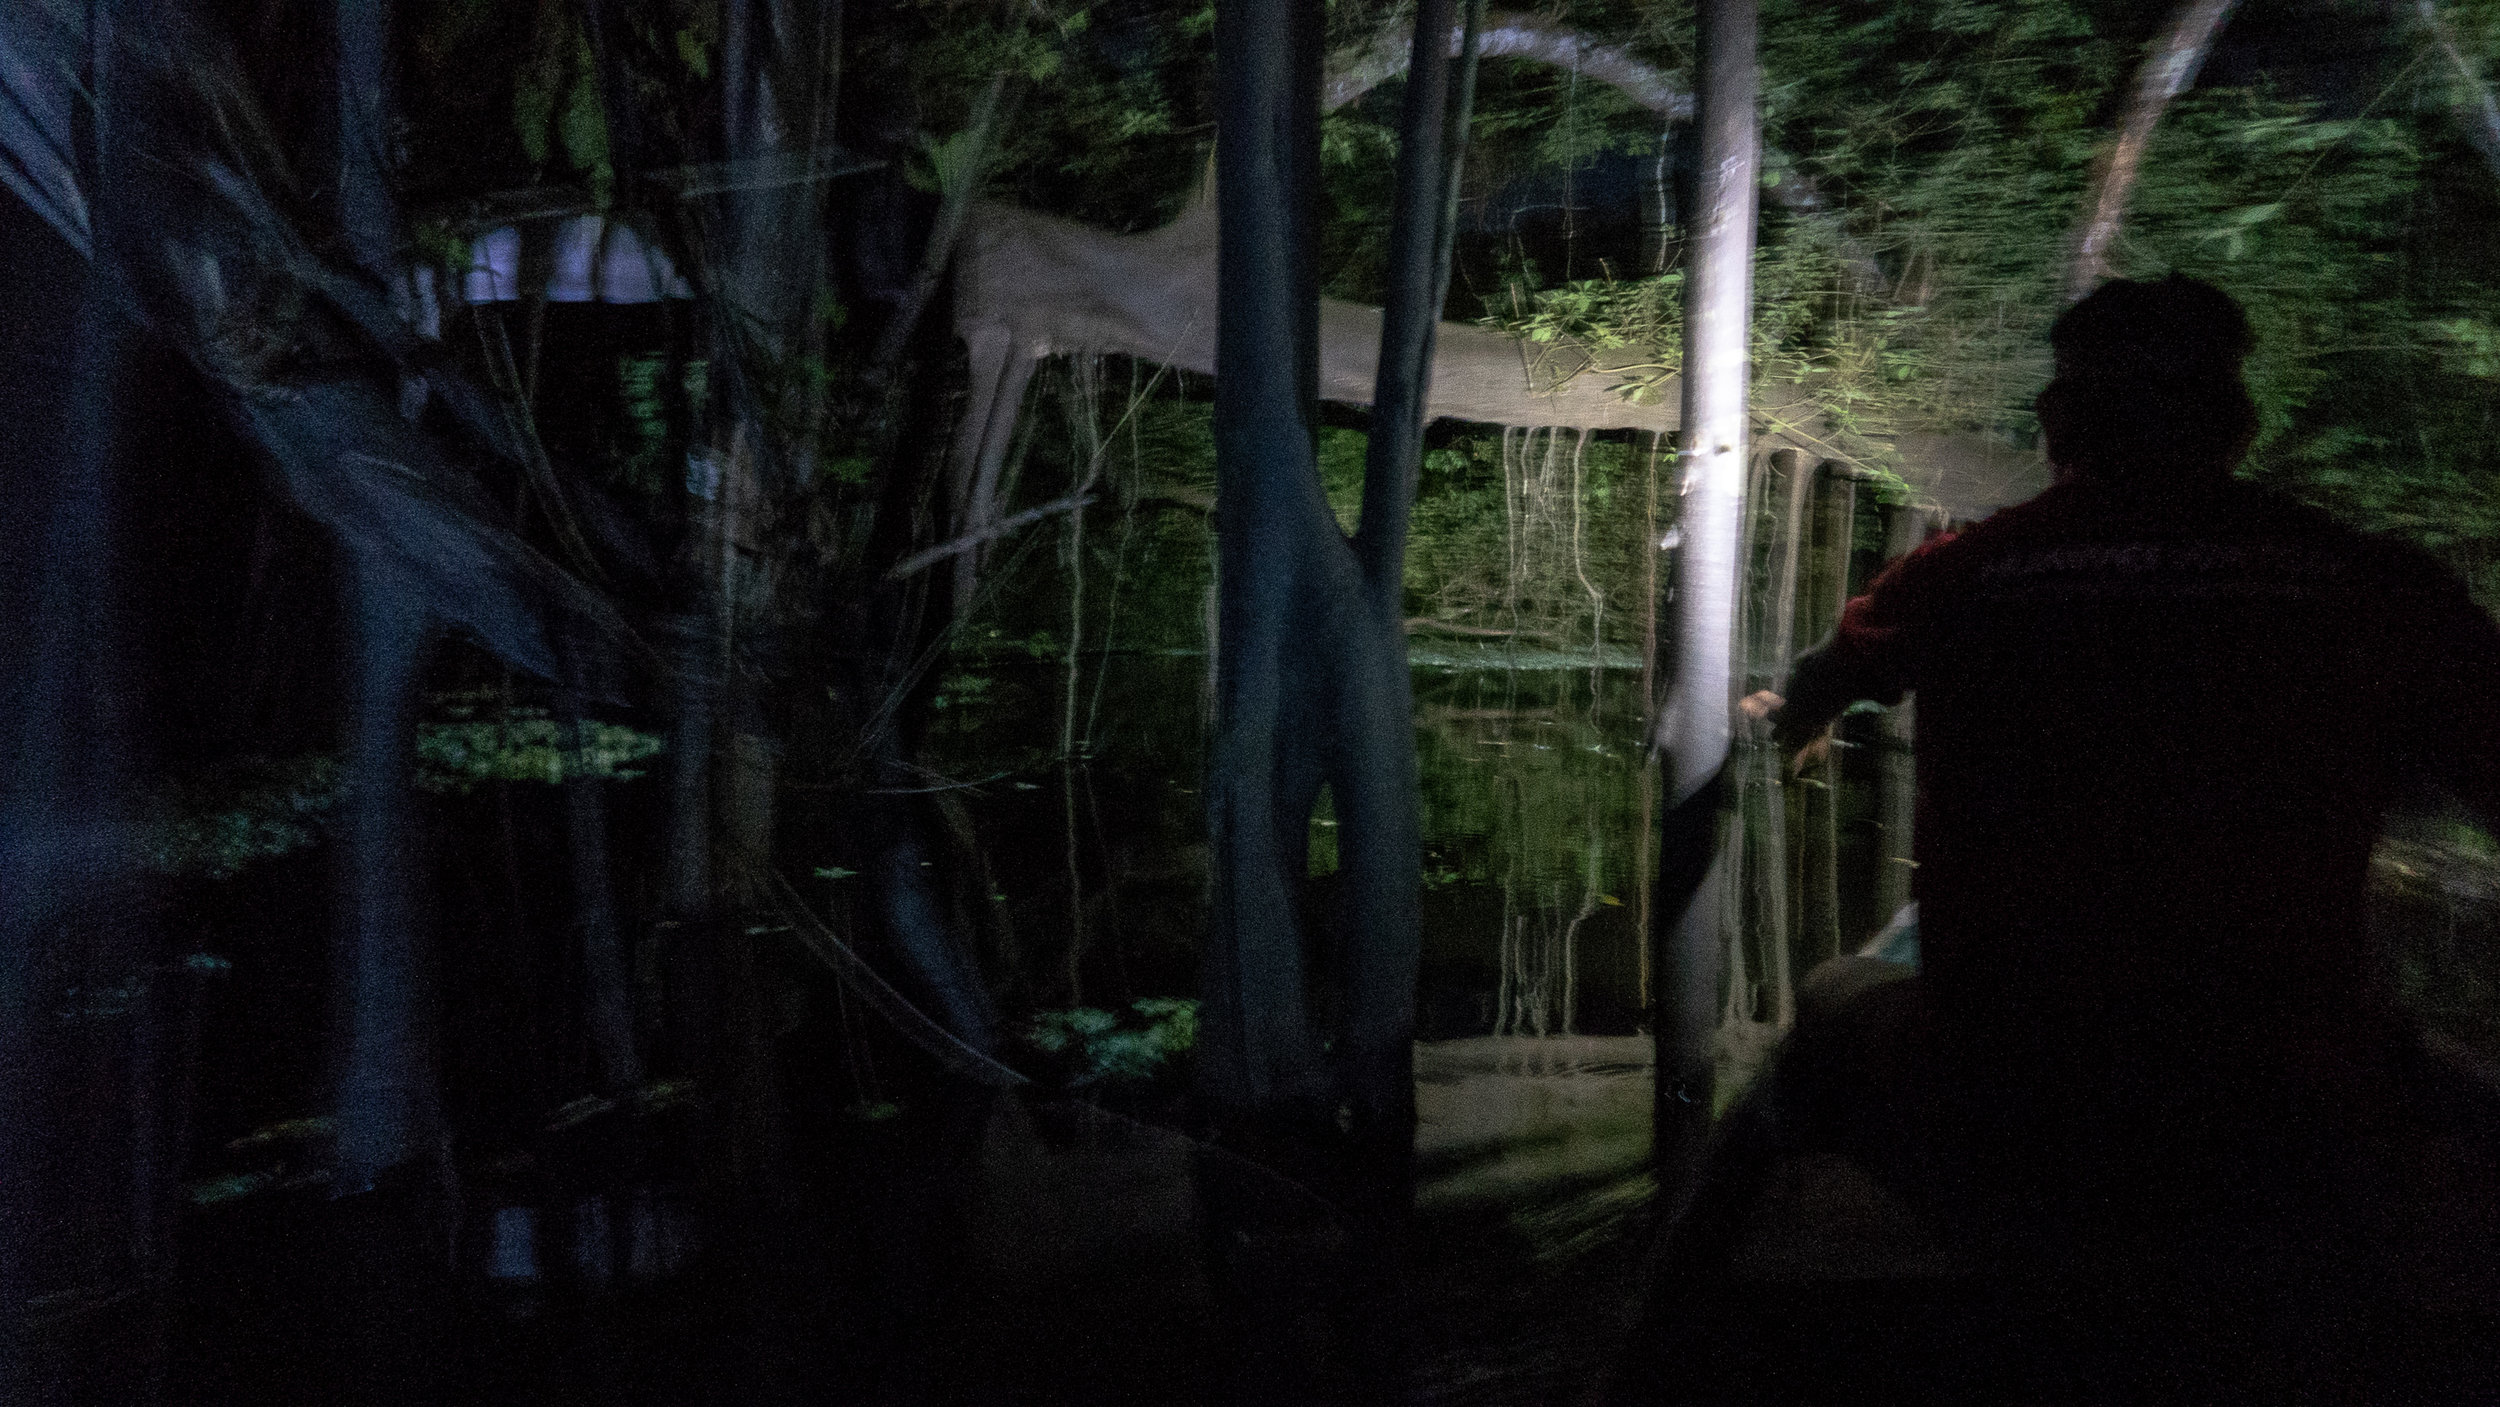 Magical night-time canoing among the rainforest